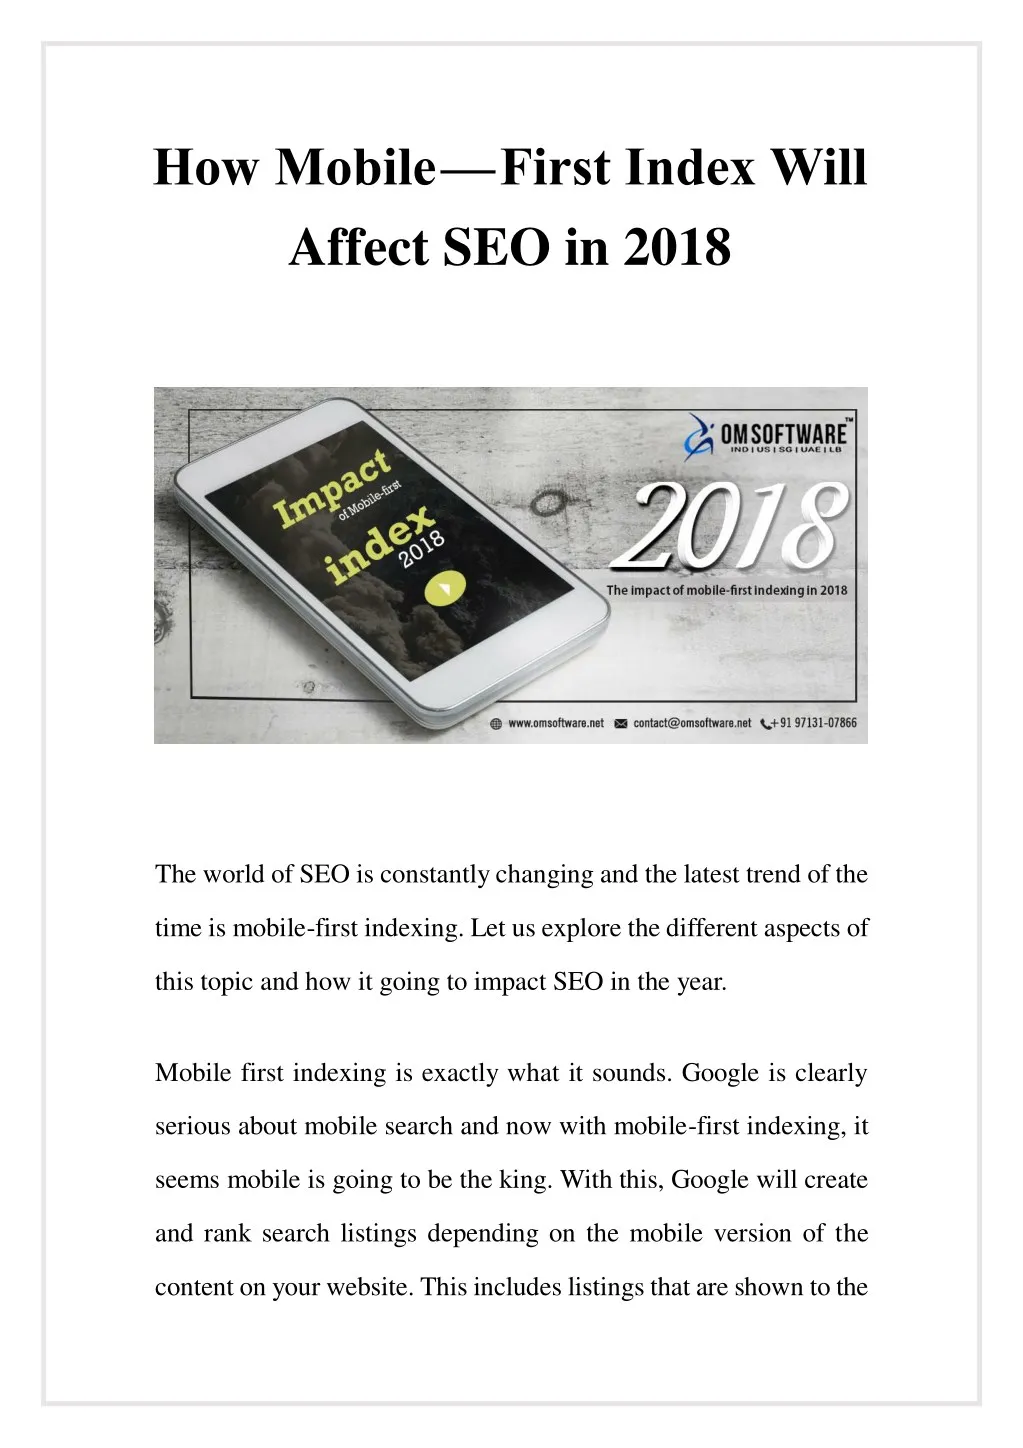 how mobile first index will affect seo in 2018